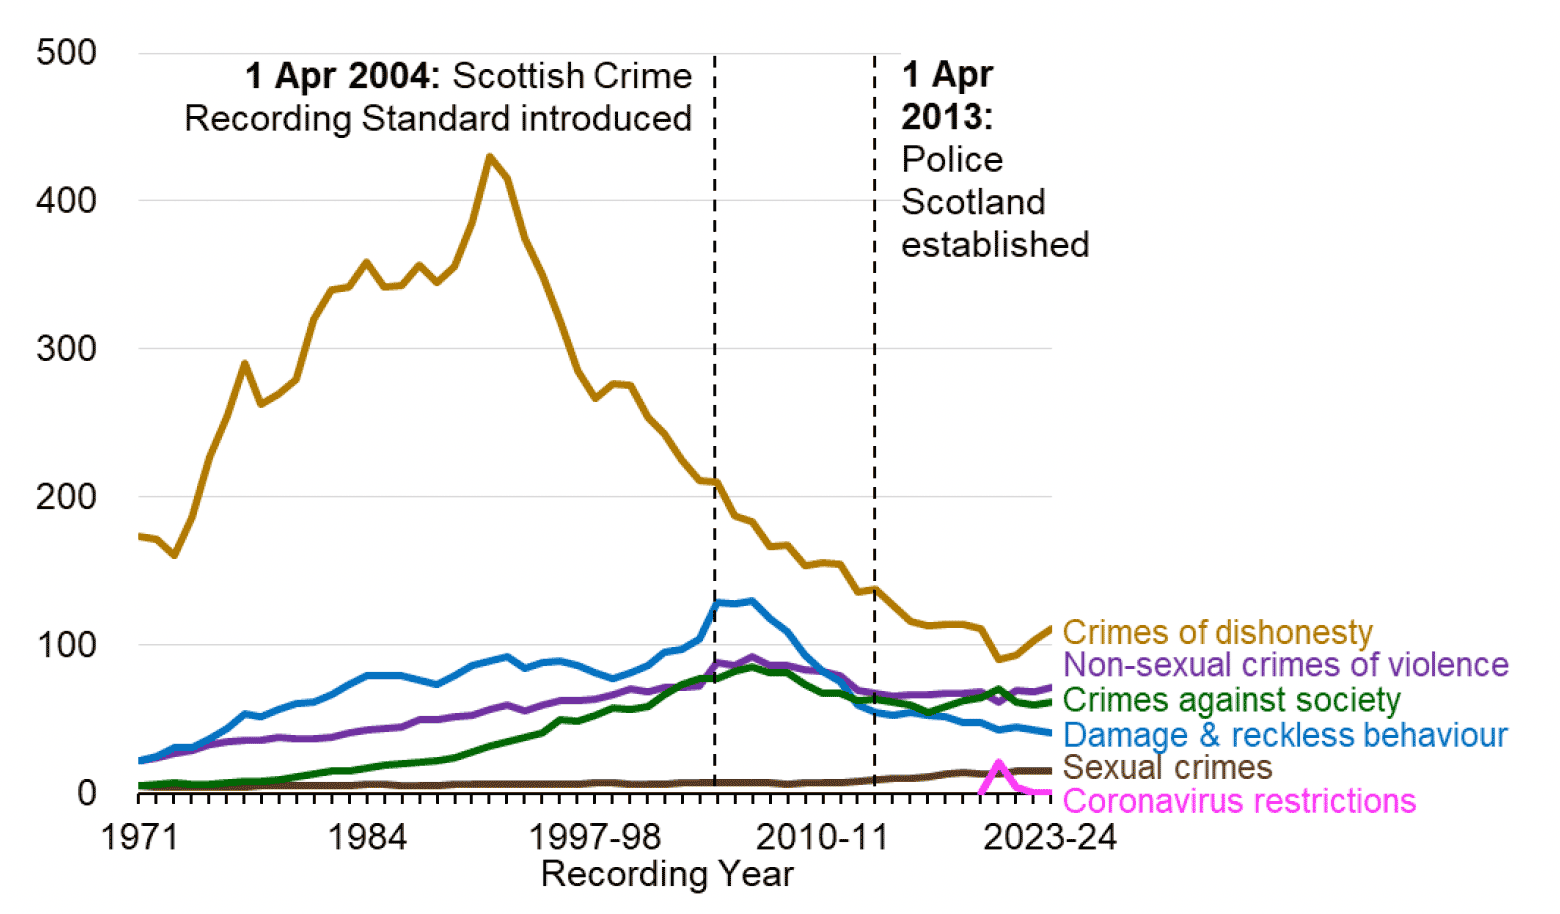 A line chart showing that the levels of crimes of dishonesty have consistently shown the highest overall level of recorded crime in each year since 1971 and Sexual crimes have consistently shown the lowest overall level of recorded crime.